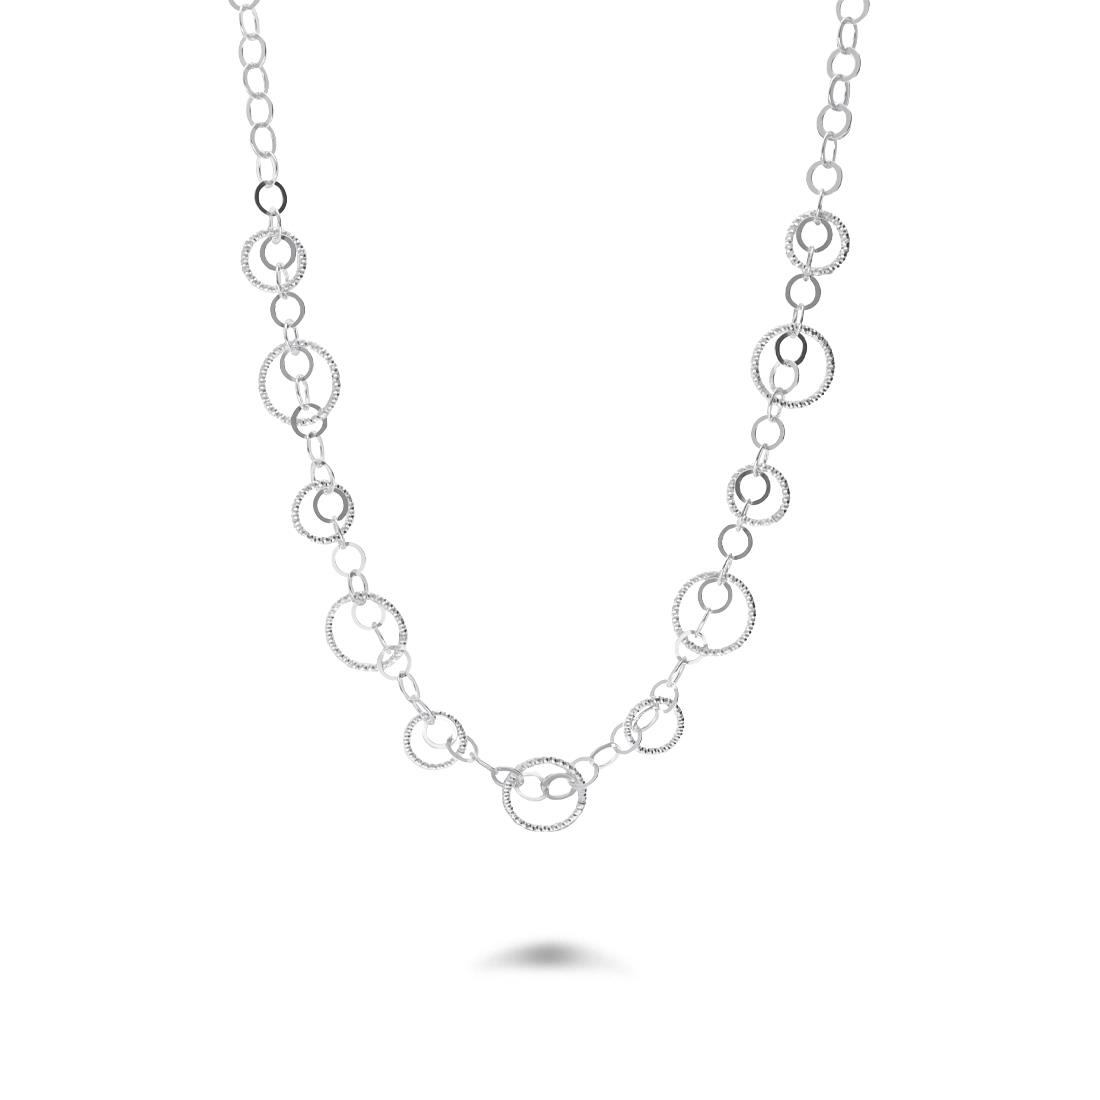 Necklace with silver circles - ORO&CO 925